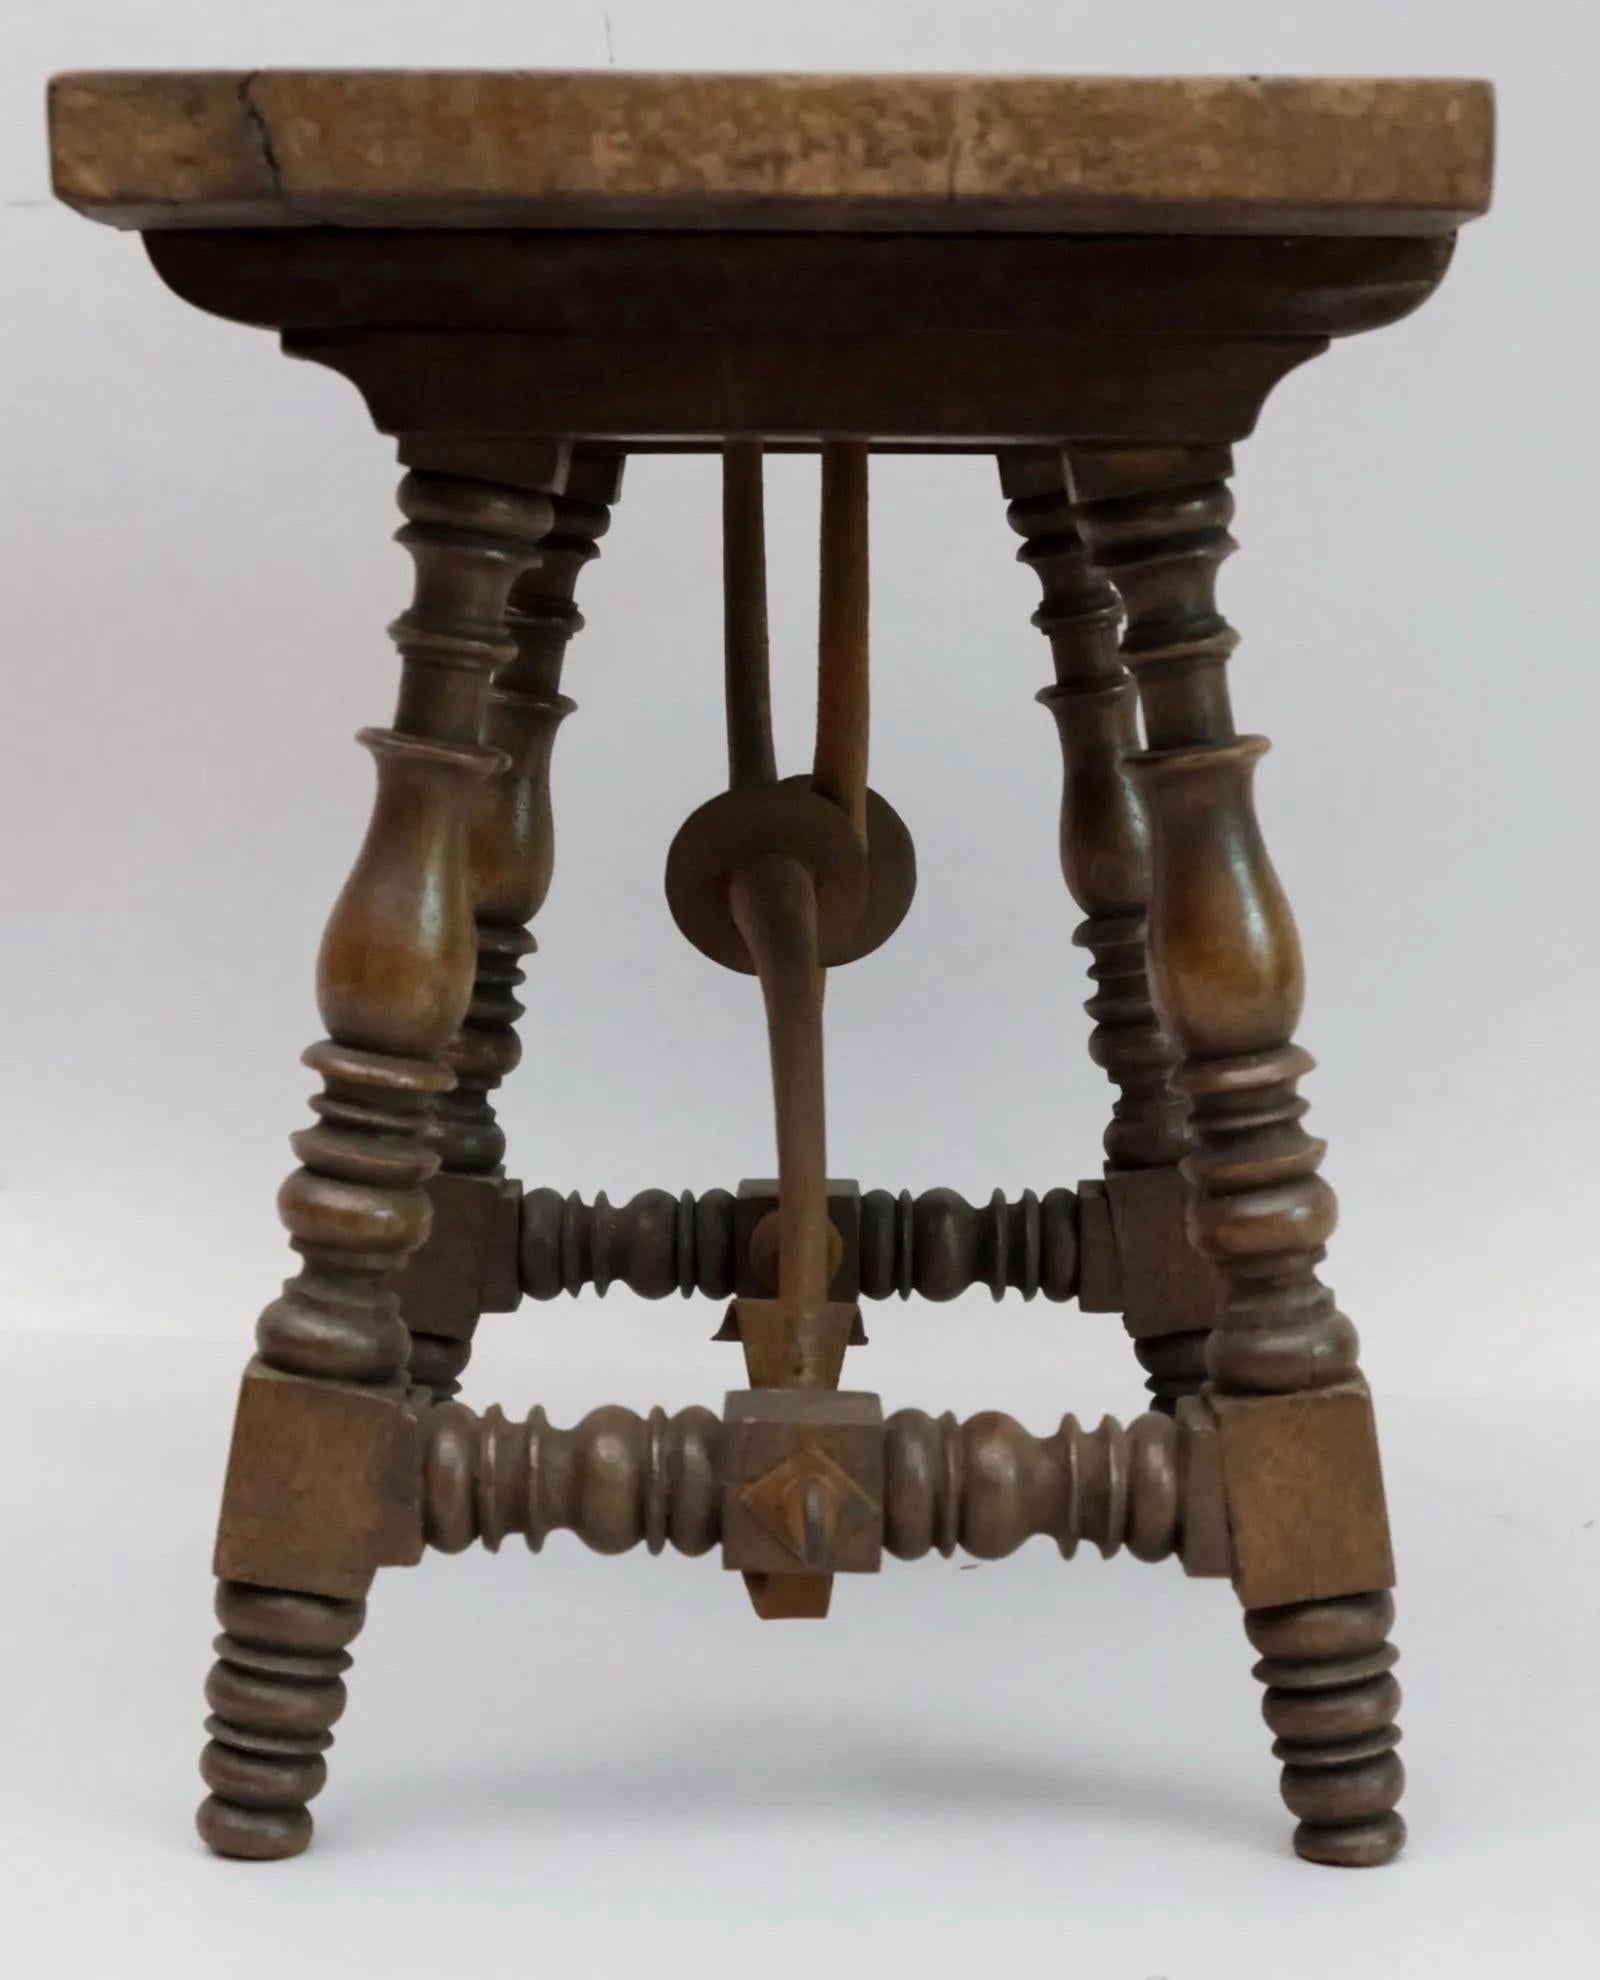 European Petite Small Renaissance Style Stool with Metal Support